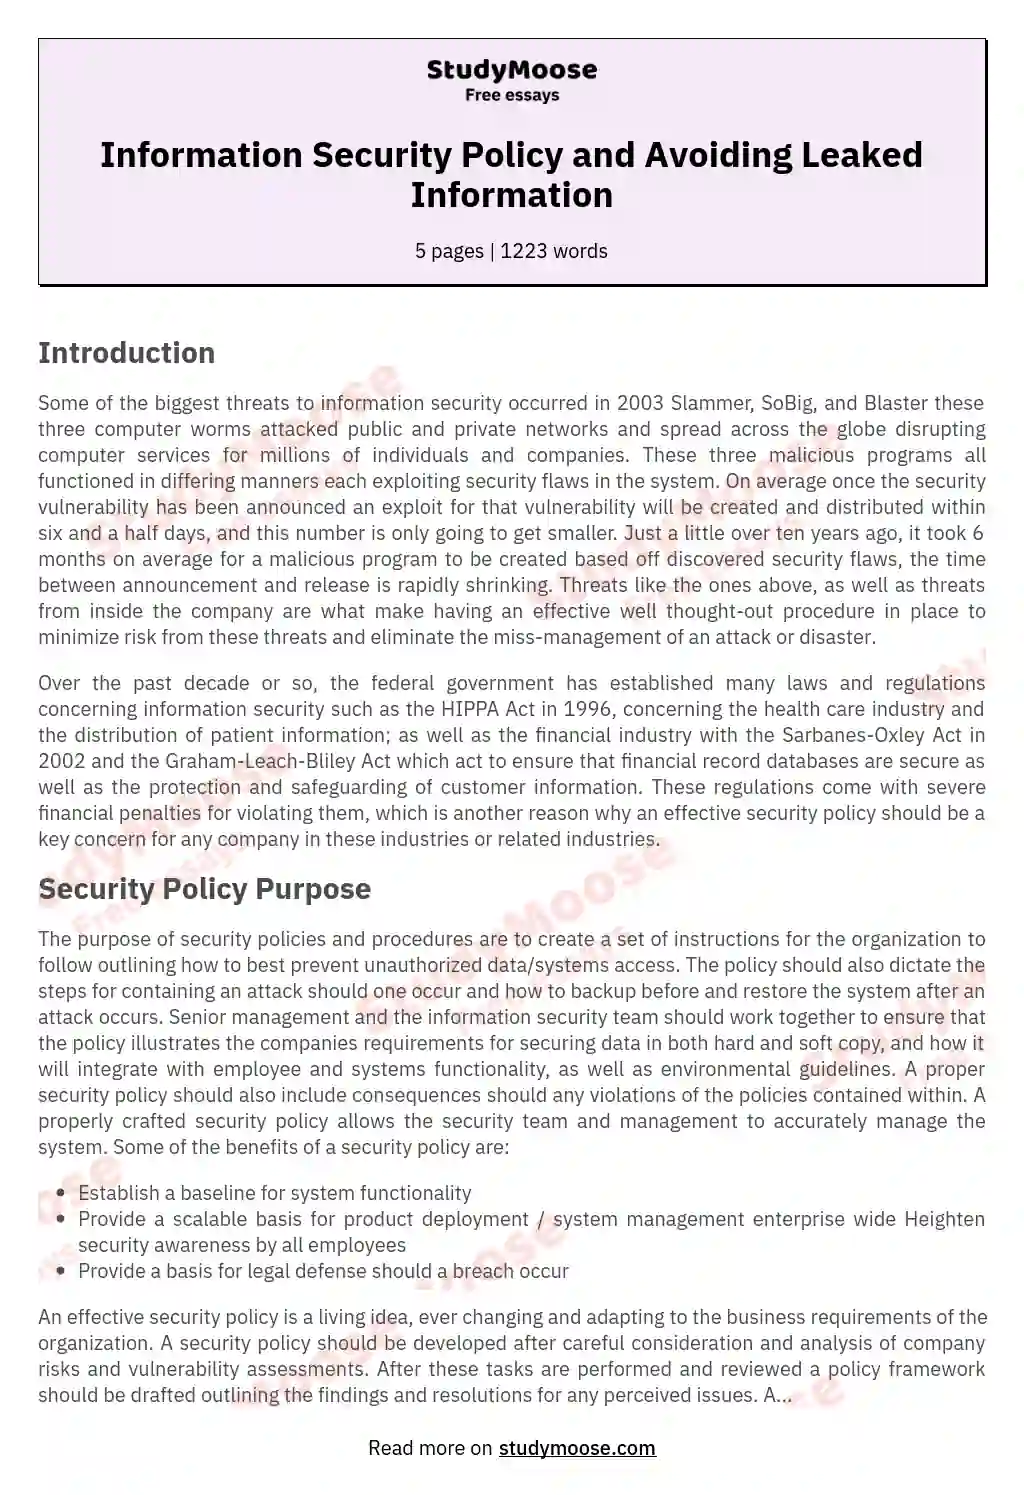 Information Security Policy and Avoiding Leaked Information